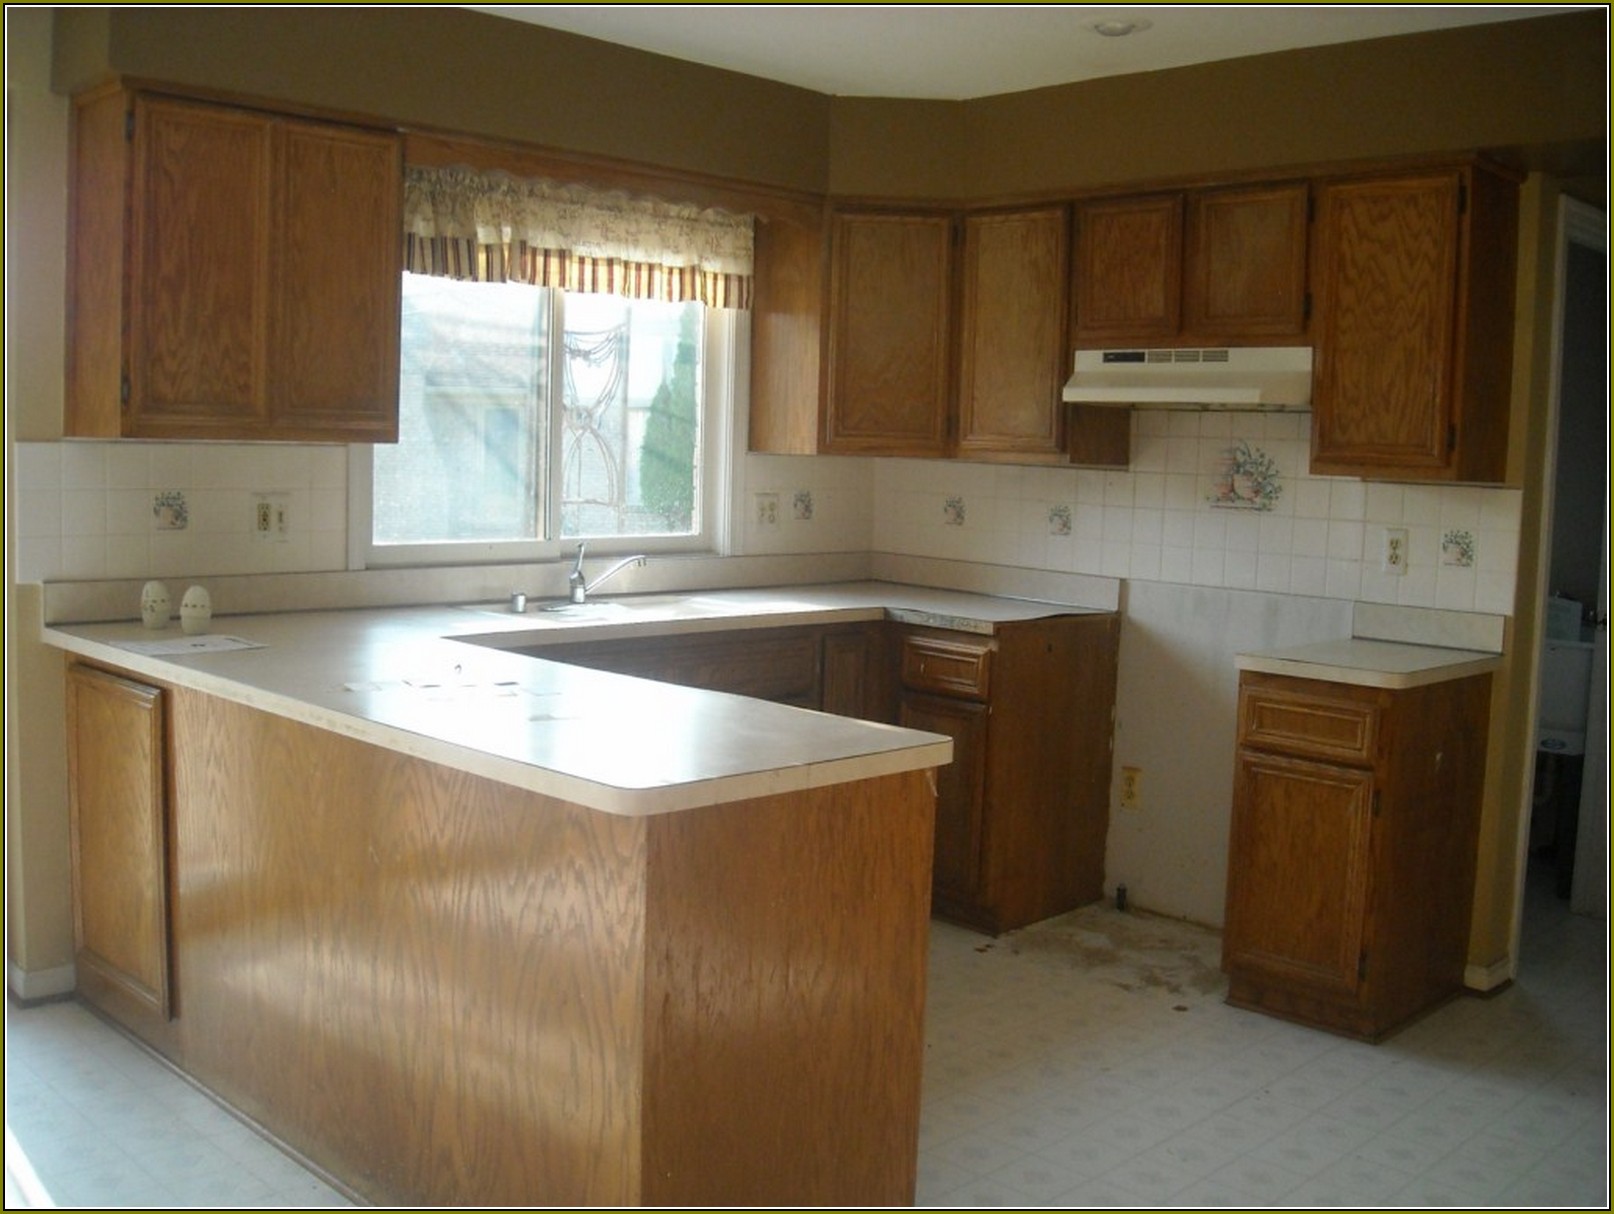 Refurbished Kitchen Cabinets Before And After